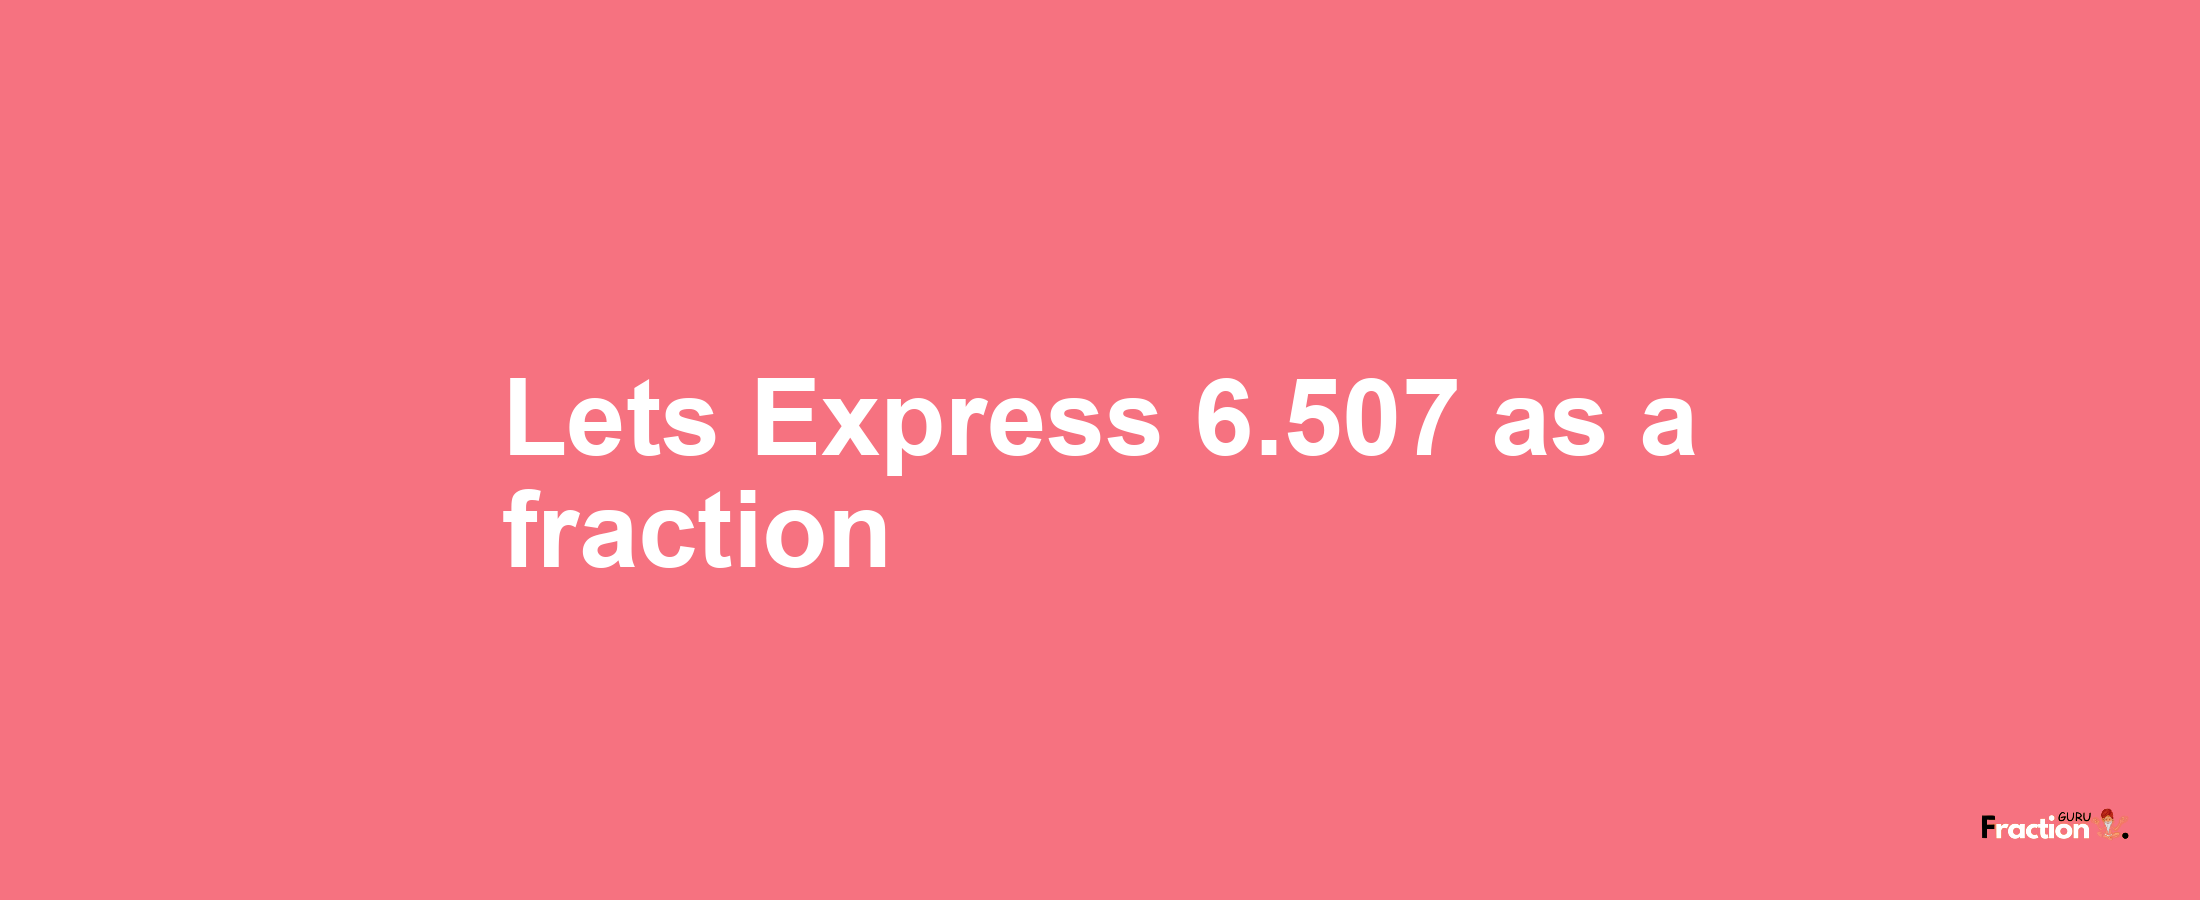 Lets Express 6.507 as afraction